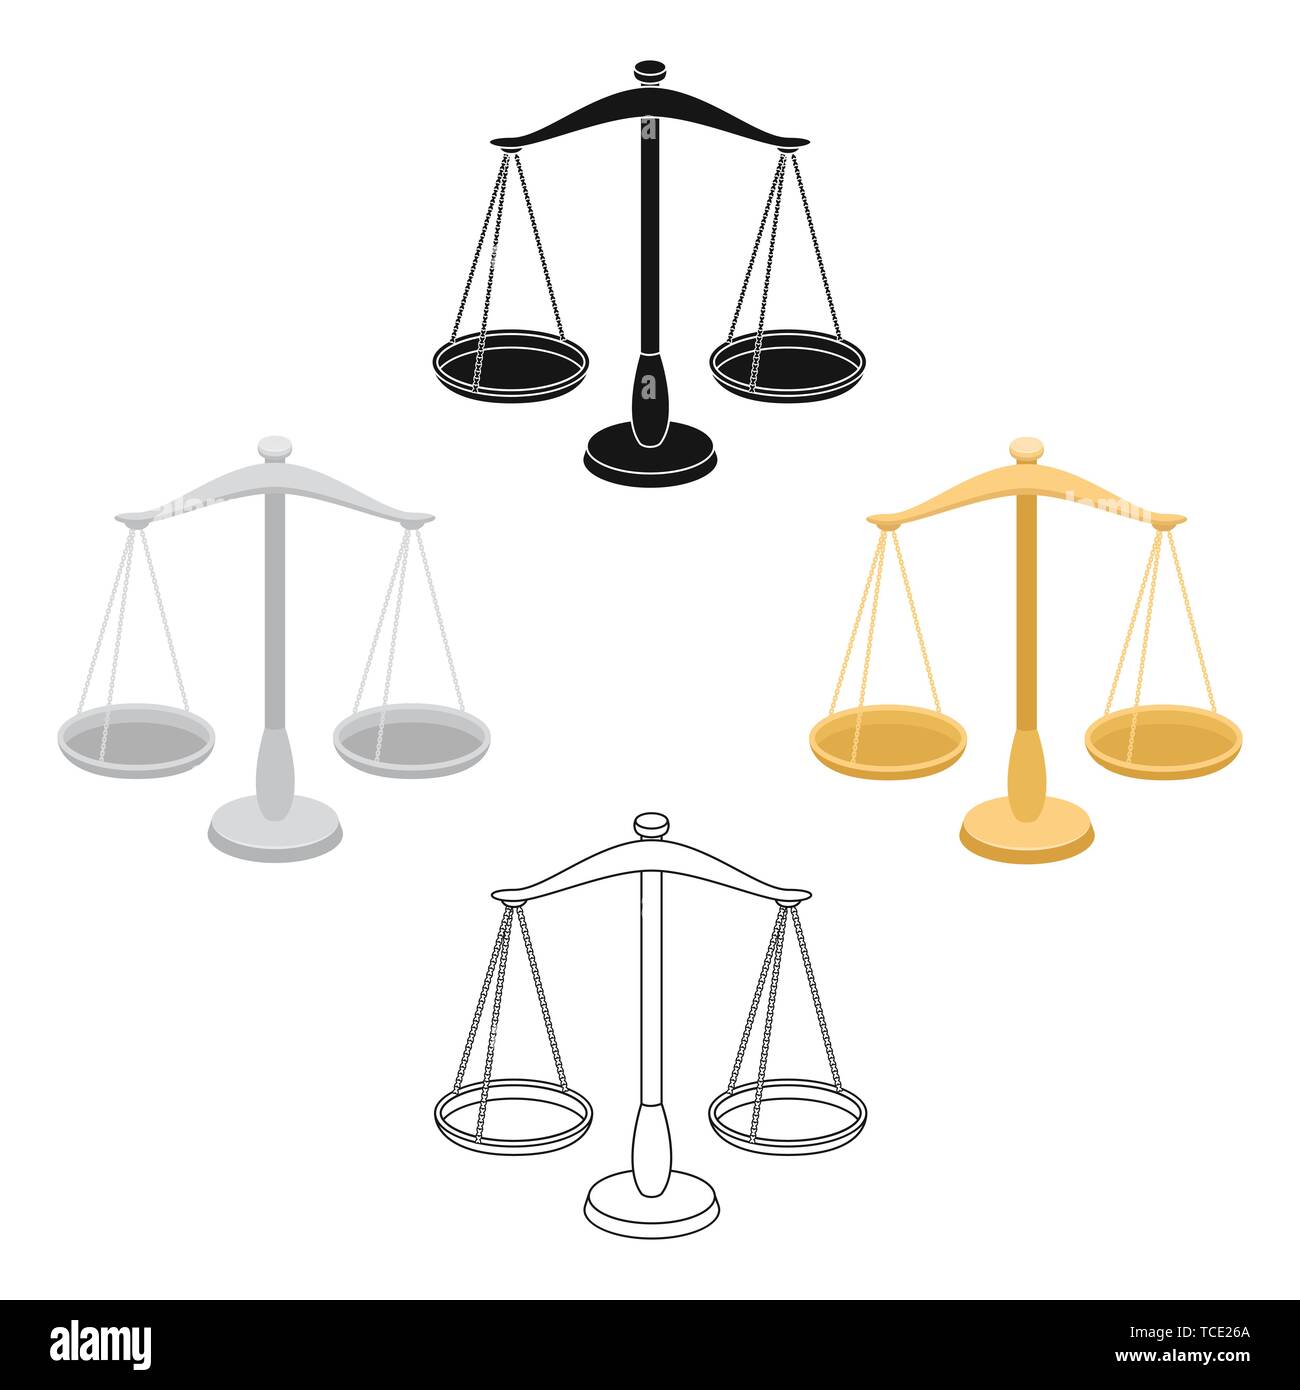 analysis,art,balance,cartoon,black,compare,comparison,court,crime,equal,equality,equilibrium,icon,illustration,integrity,isolated,jewelry,judge,justice,law,lawyer,legal,libra,logo,measure,measurement,measuring,object,punishment,scale,scales,sign  ...